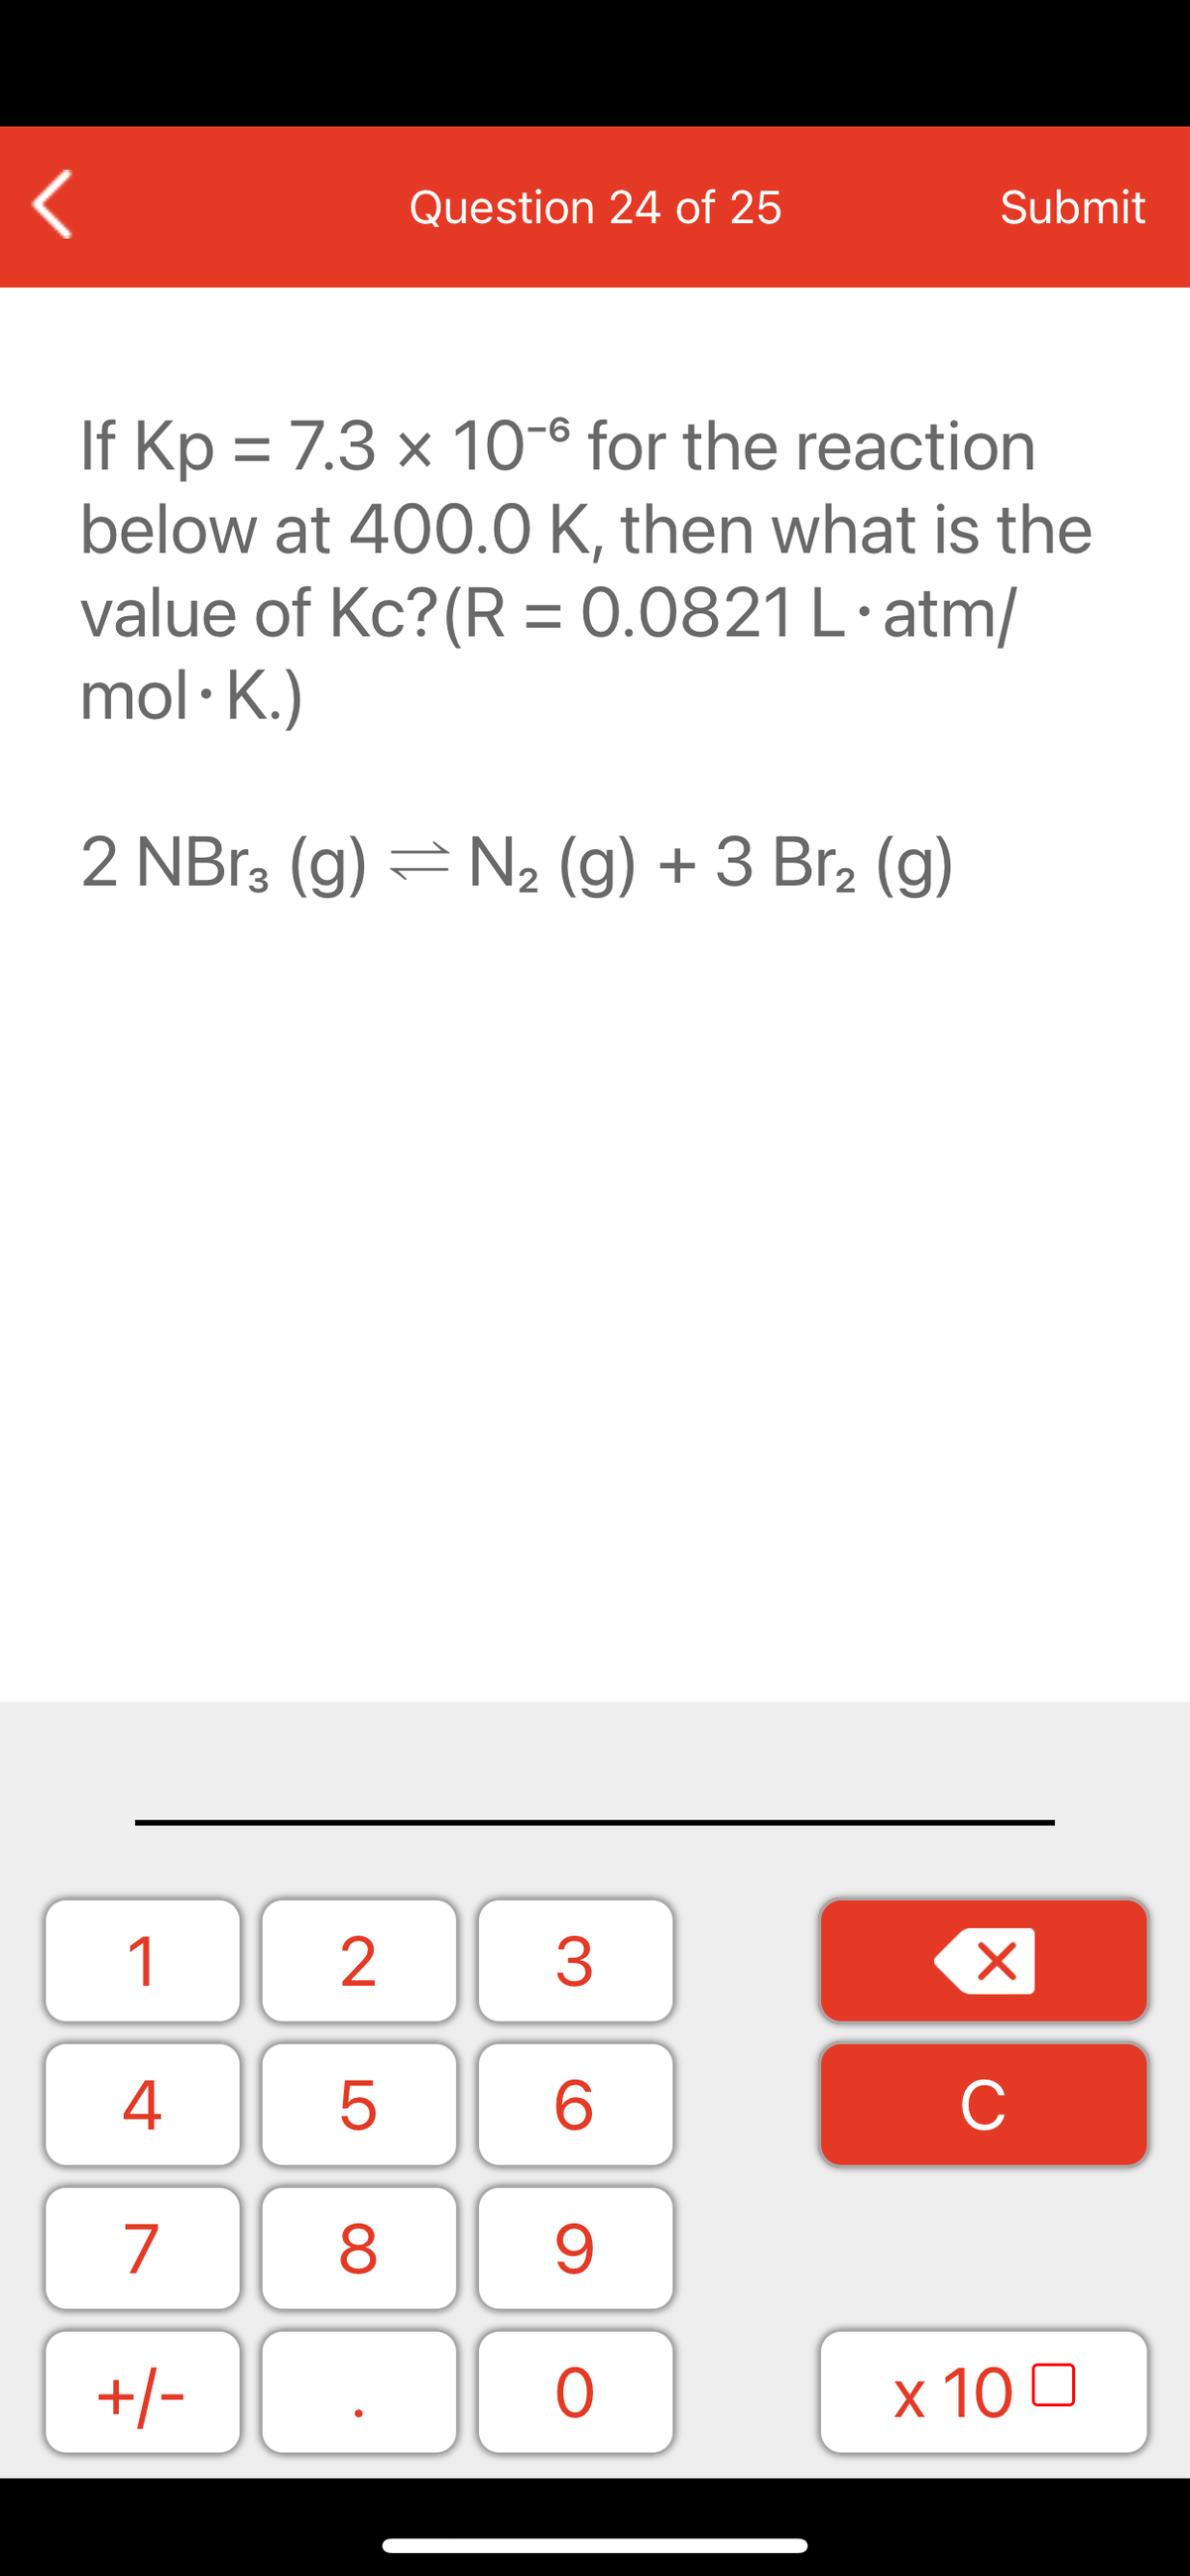 Question 24 of 25
Submit
If Kp = 7.3 × 10-6 for the reaction
below at 400.0 K, then what is the
value of Kc?(R = 0.0821 L·atm/
mol · K.)
2 NB13 (g) =N2 (g) + 3 Br2 (g)
1
2
3
C
7
9.
+/-
x 10 0
LO
00
